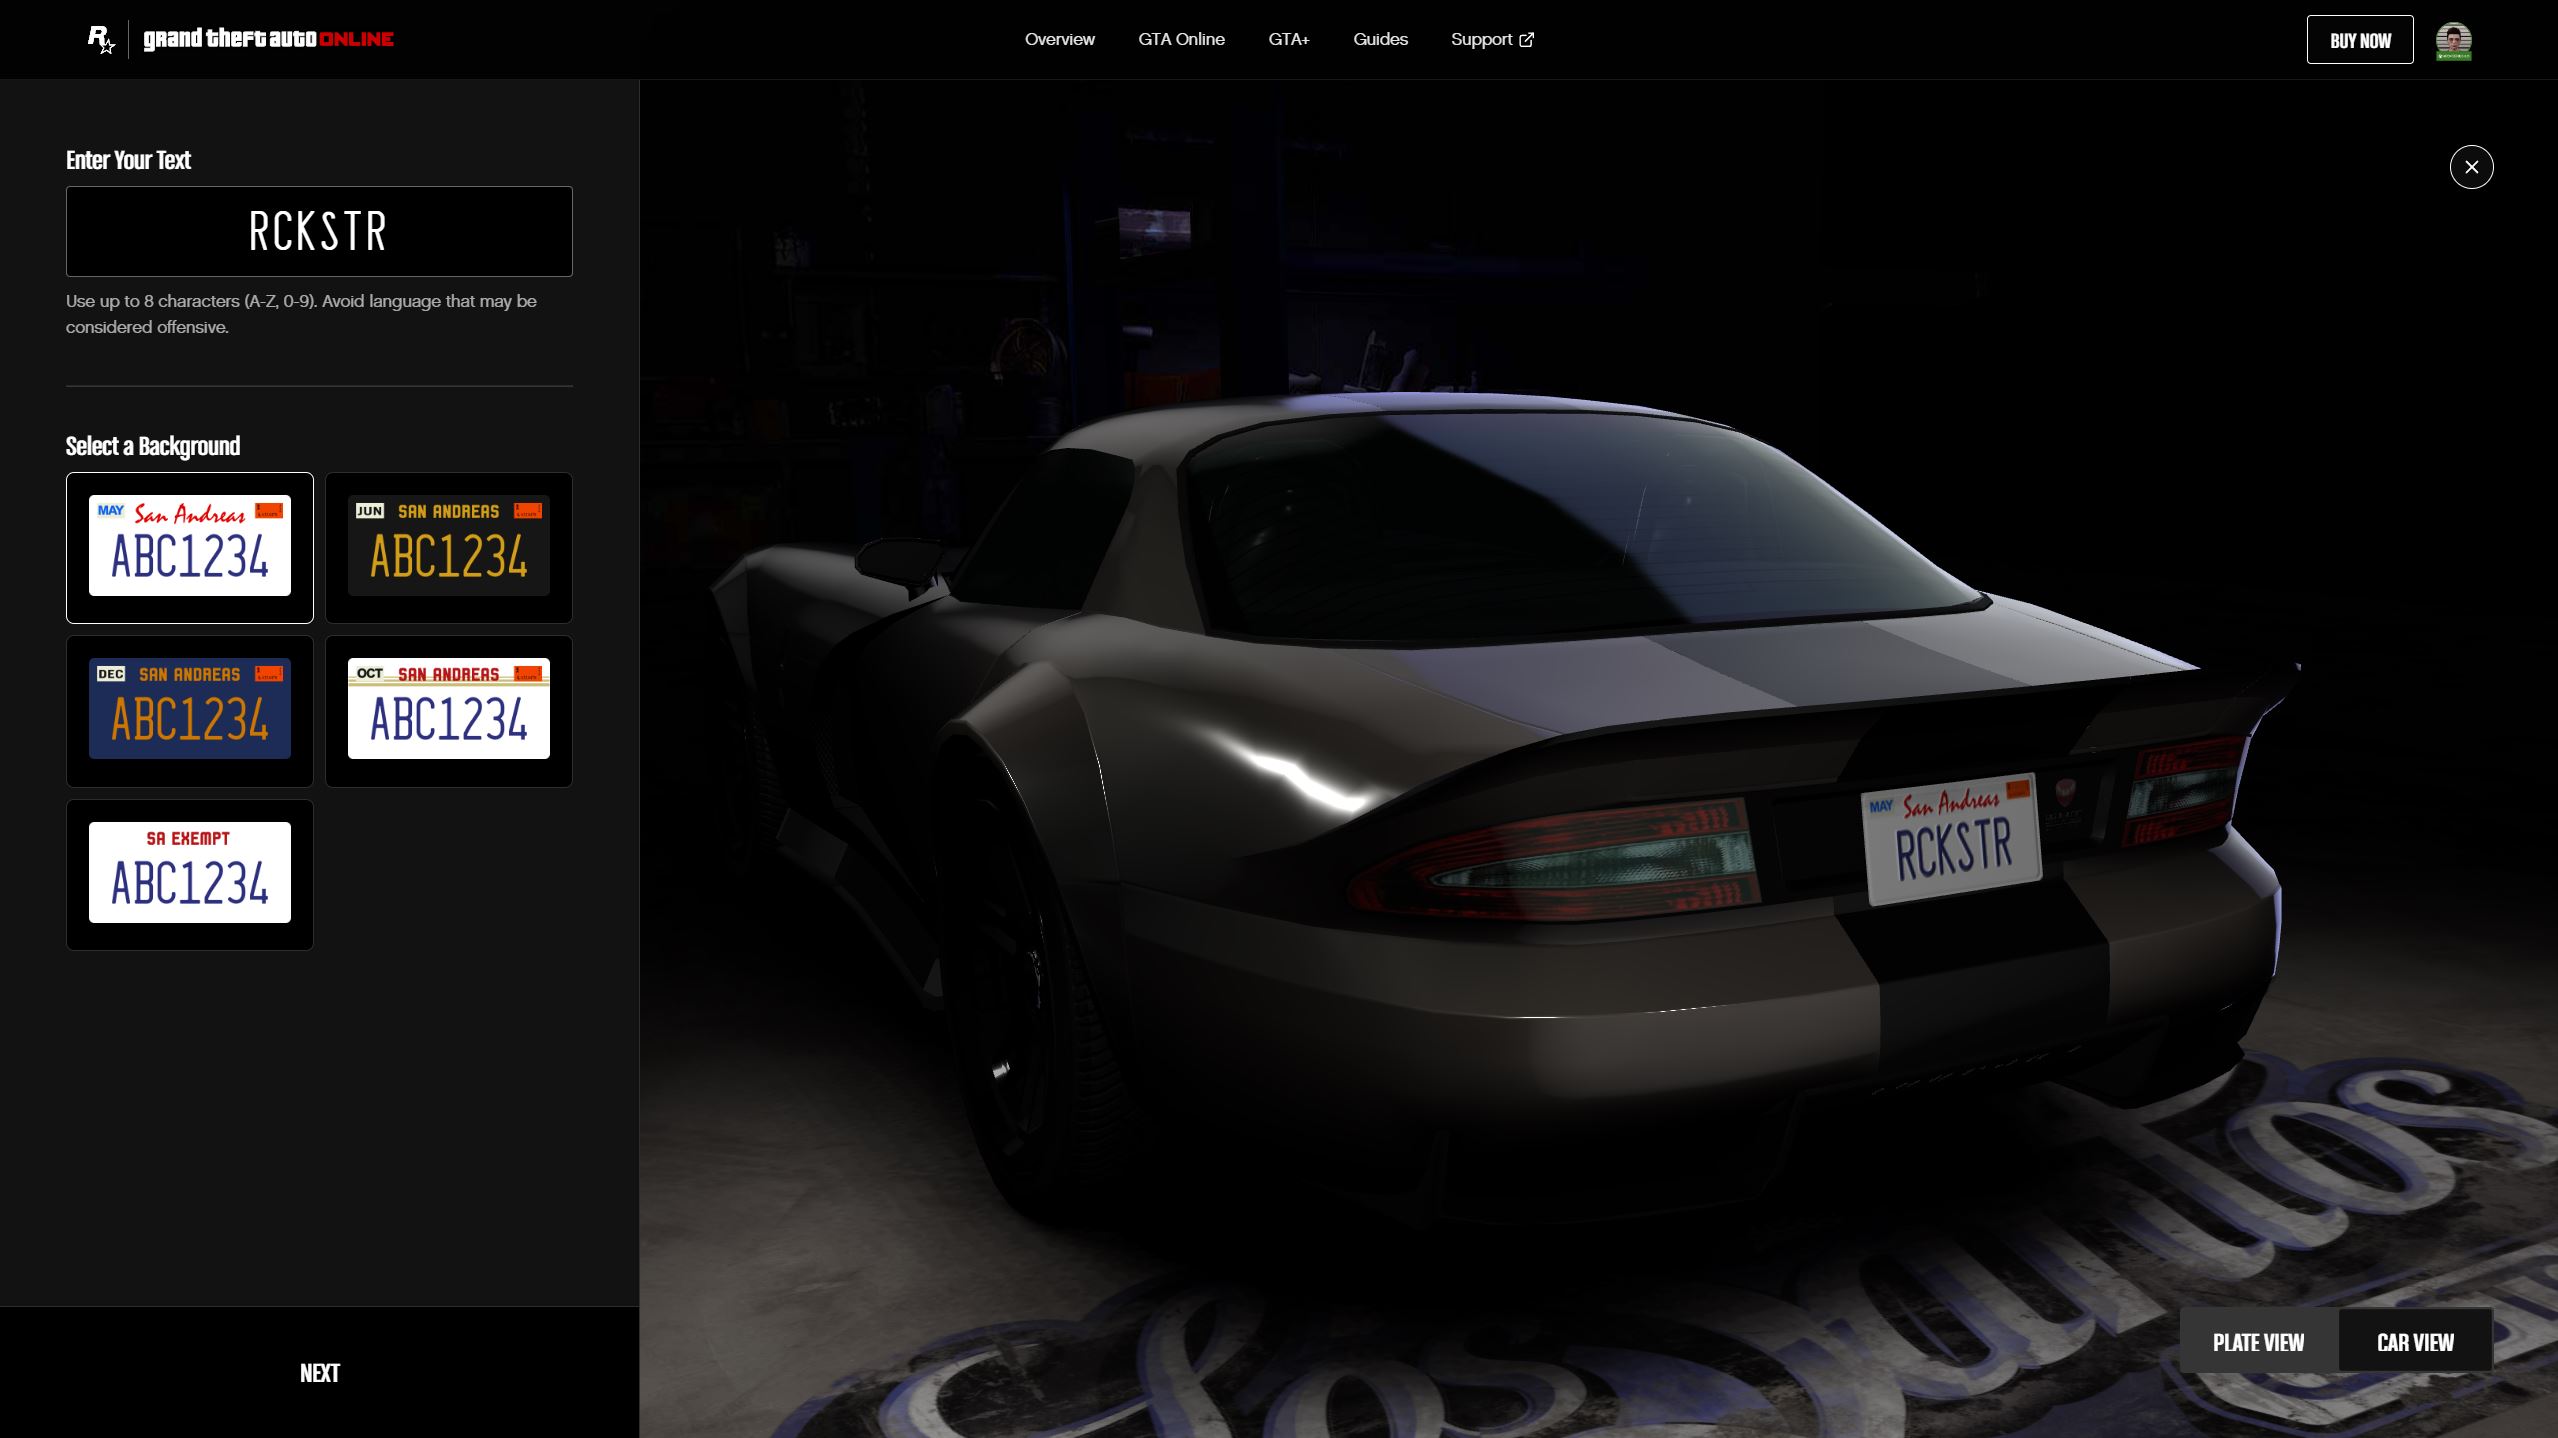 How to use the new GTA Online License Plate Creator and what features